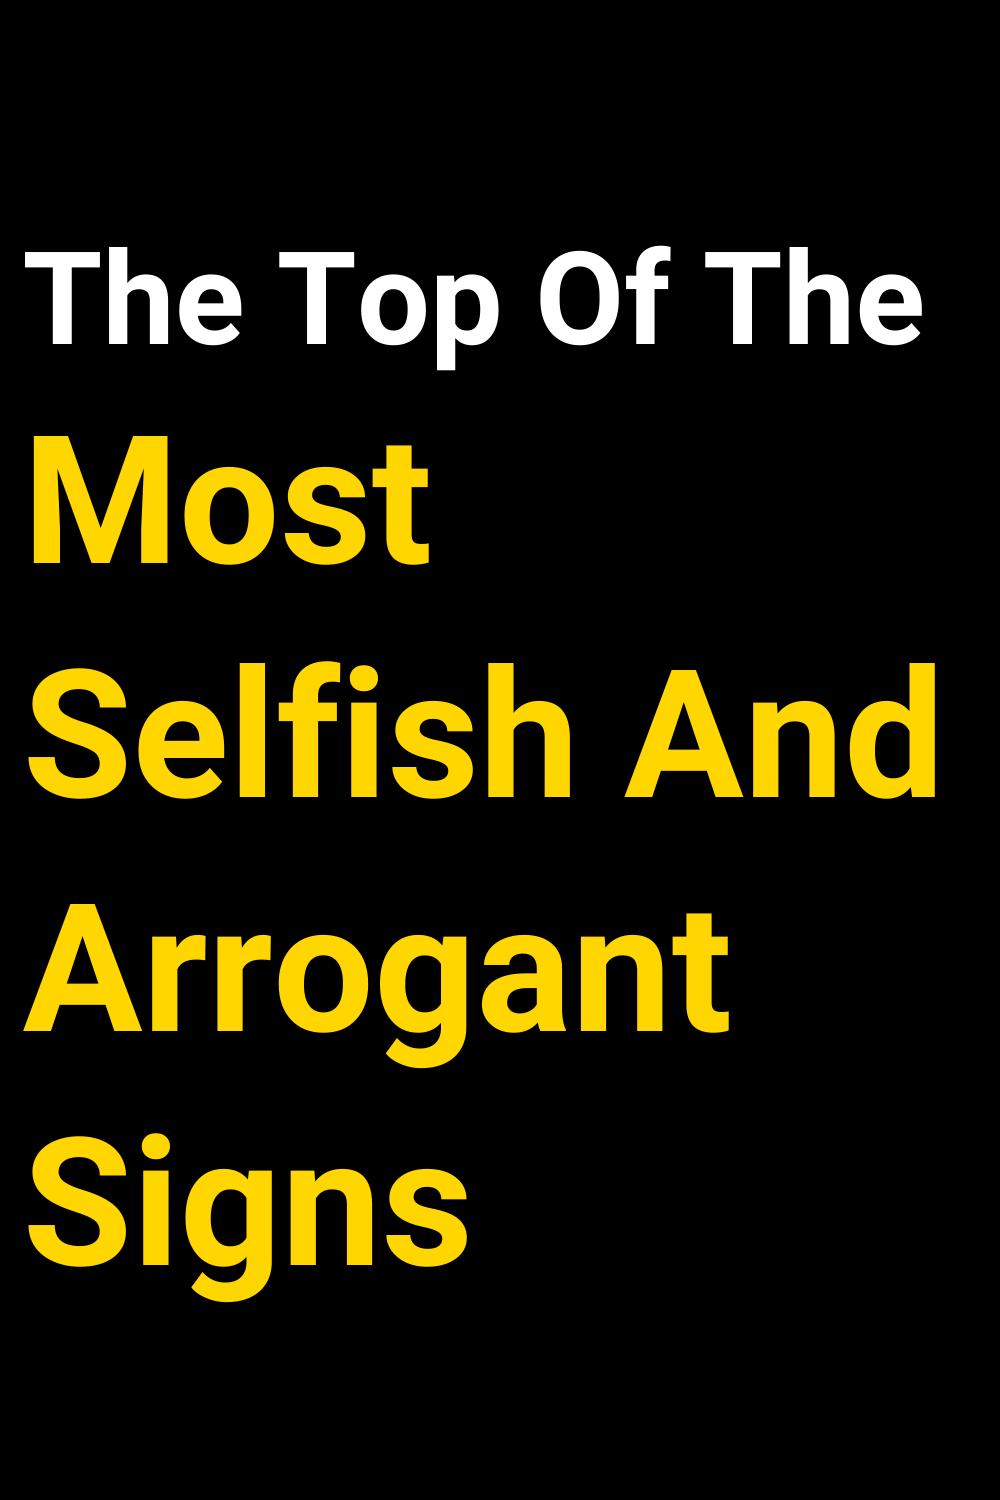 The Top Of The Most Selfish And Arrogant Signs